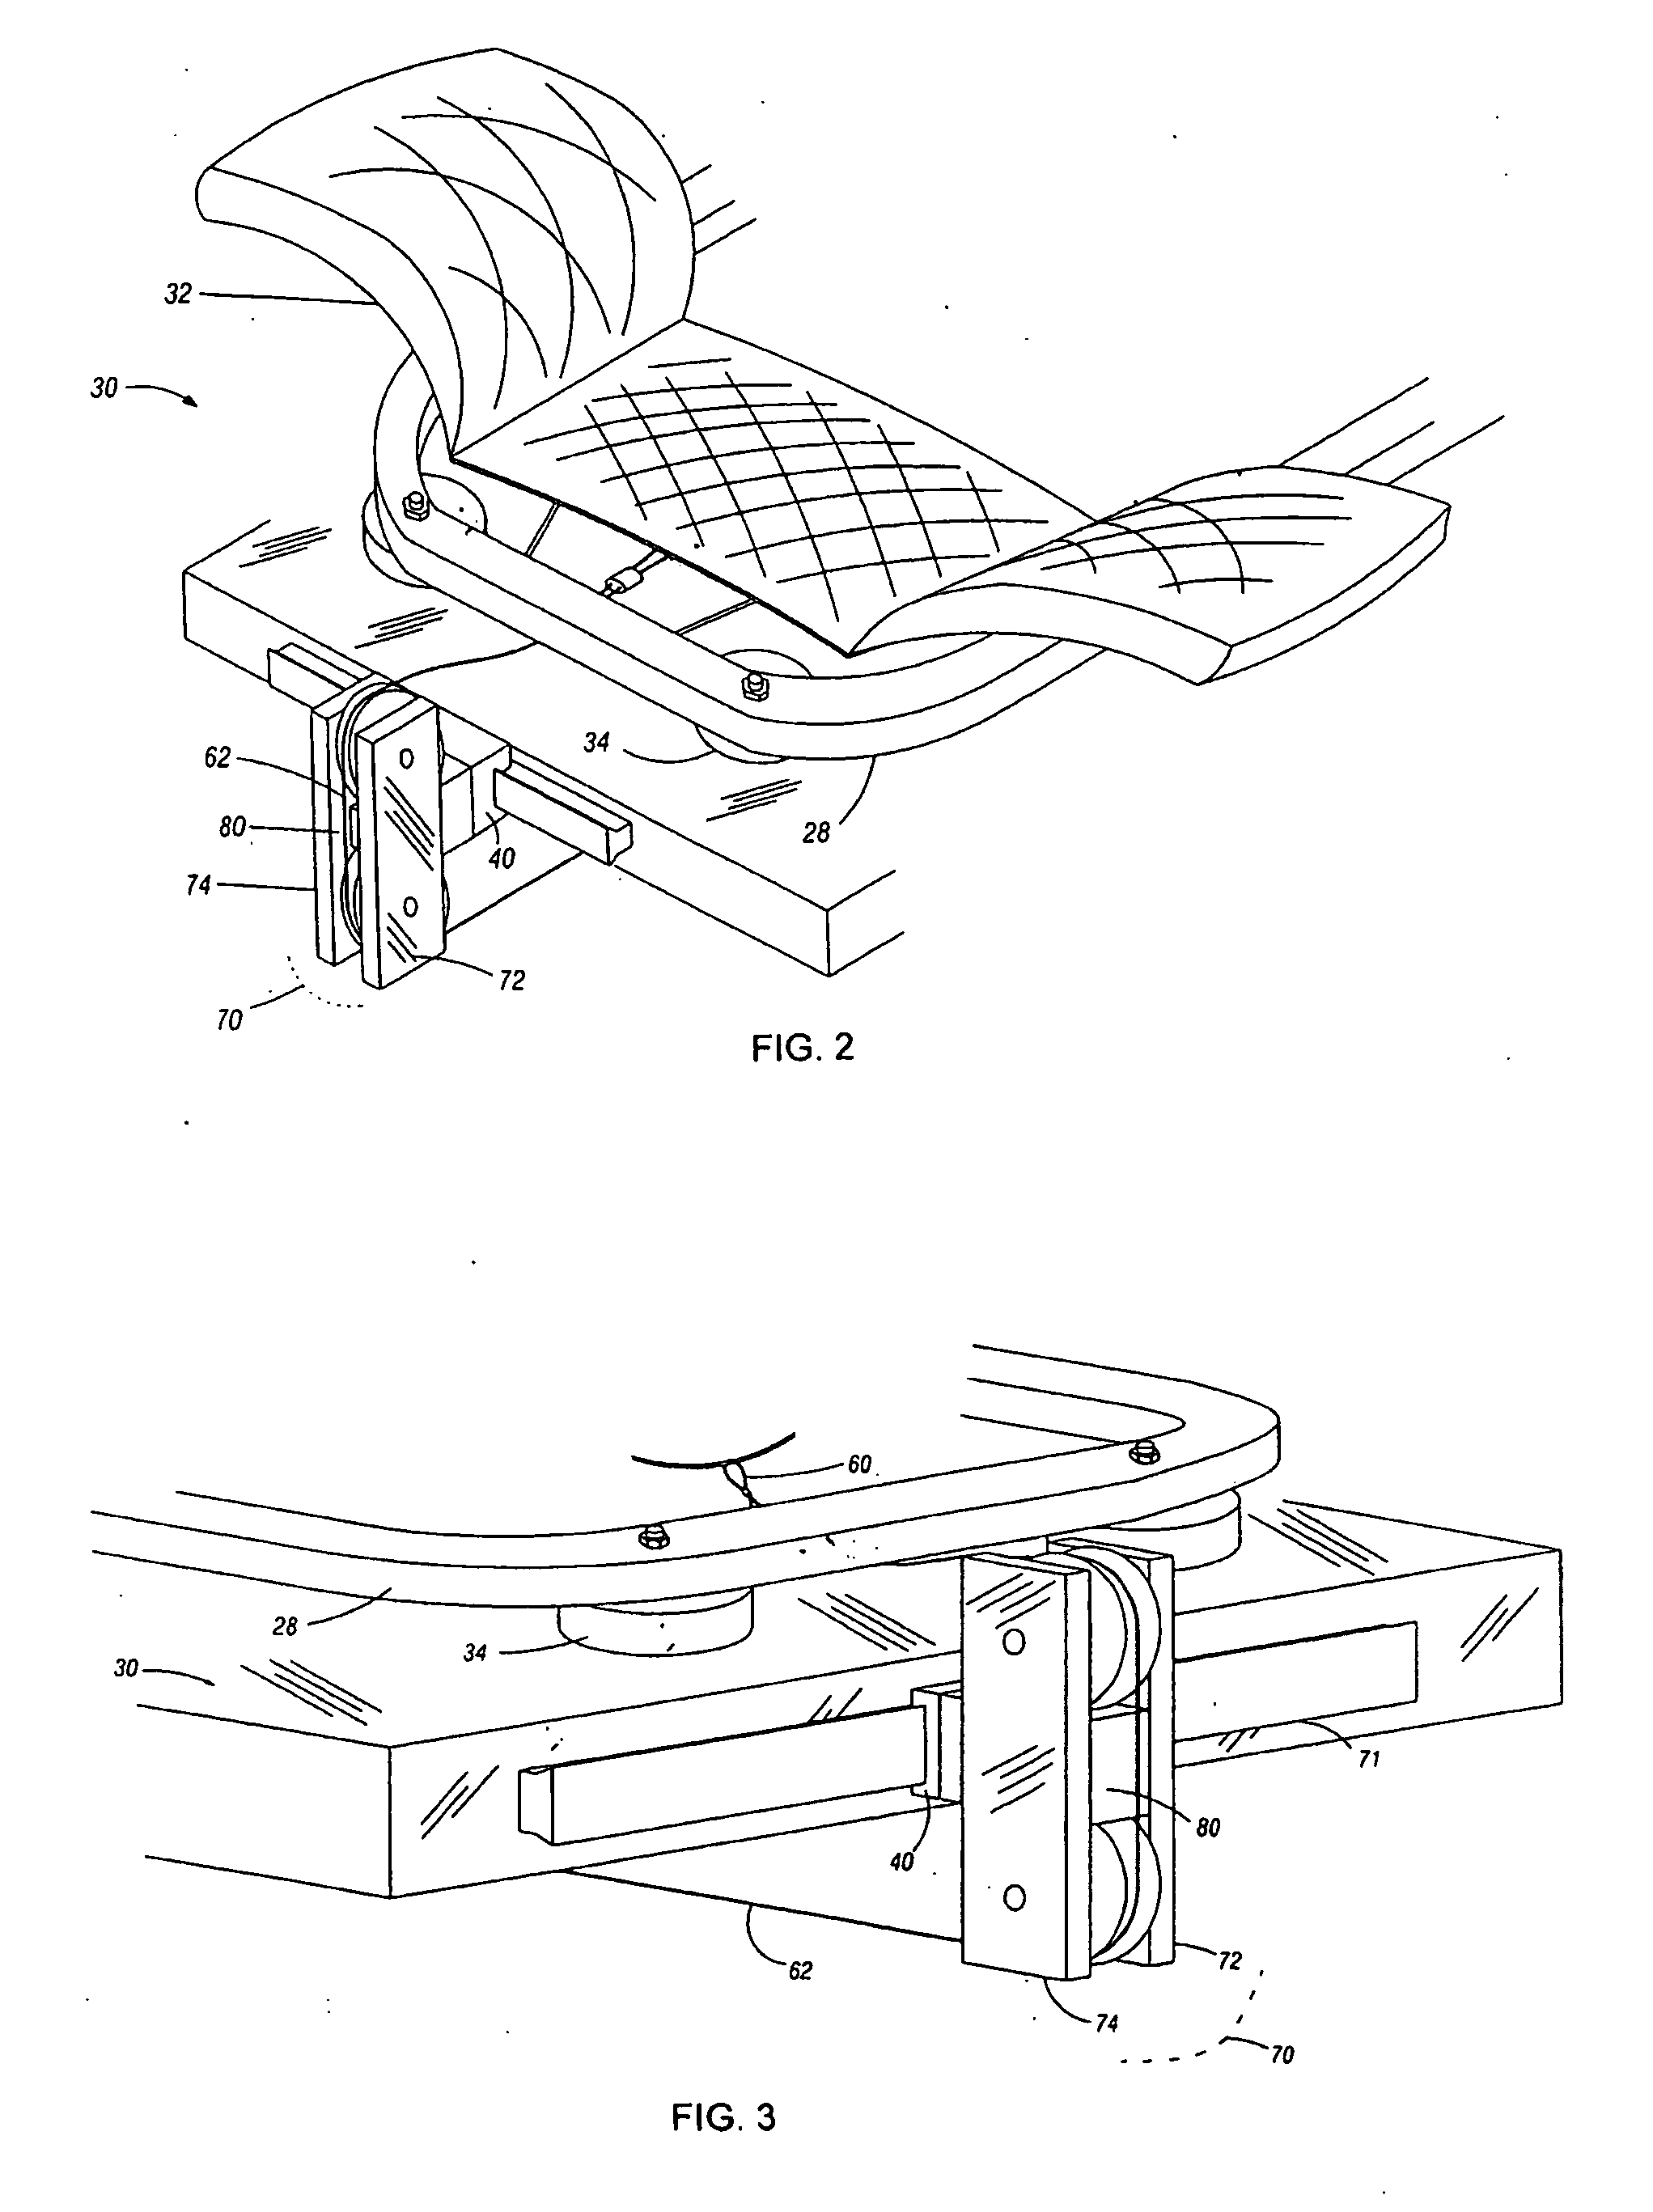 Method and device for gravity like simulation of natural balance movements